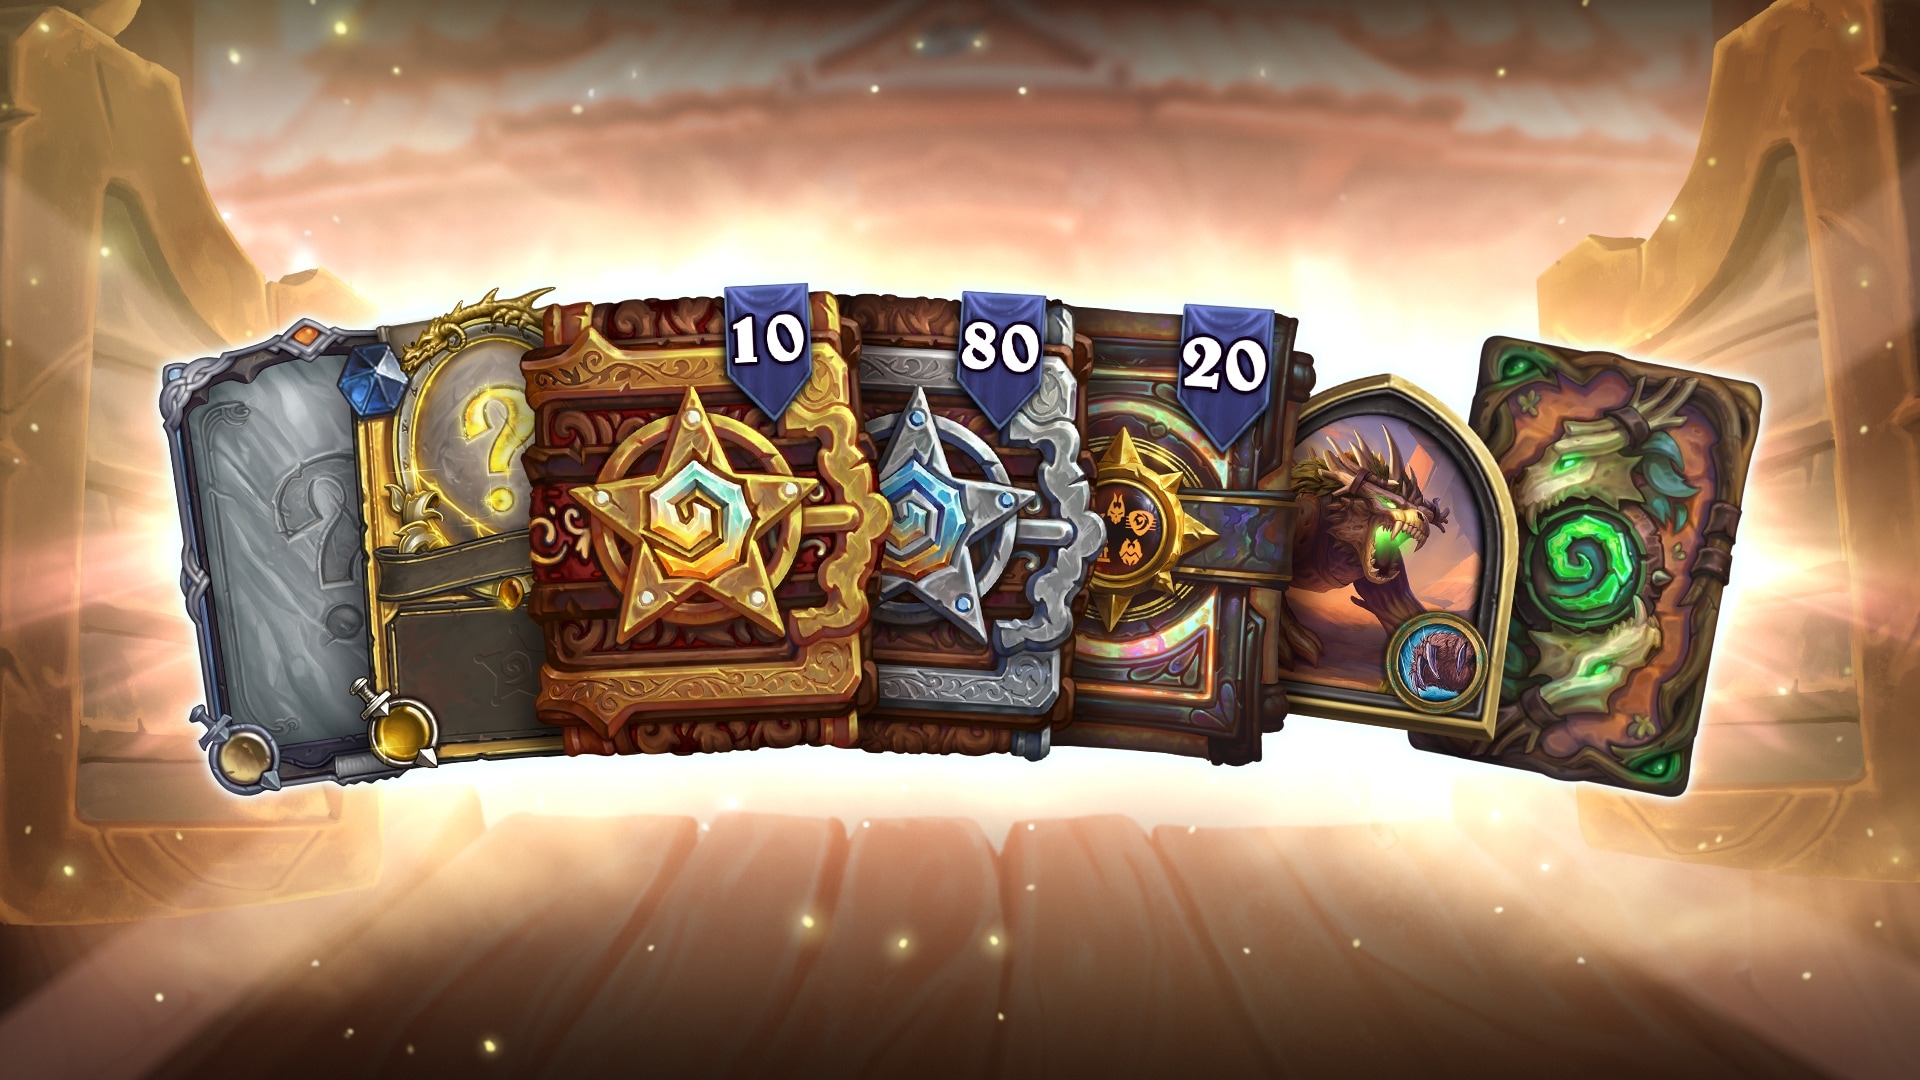 Twitch drops badlands packs don't show. : r/hearthstone